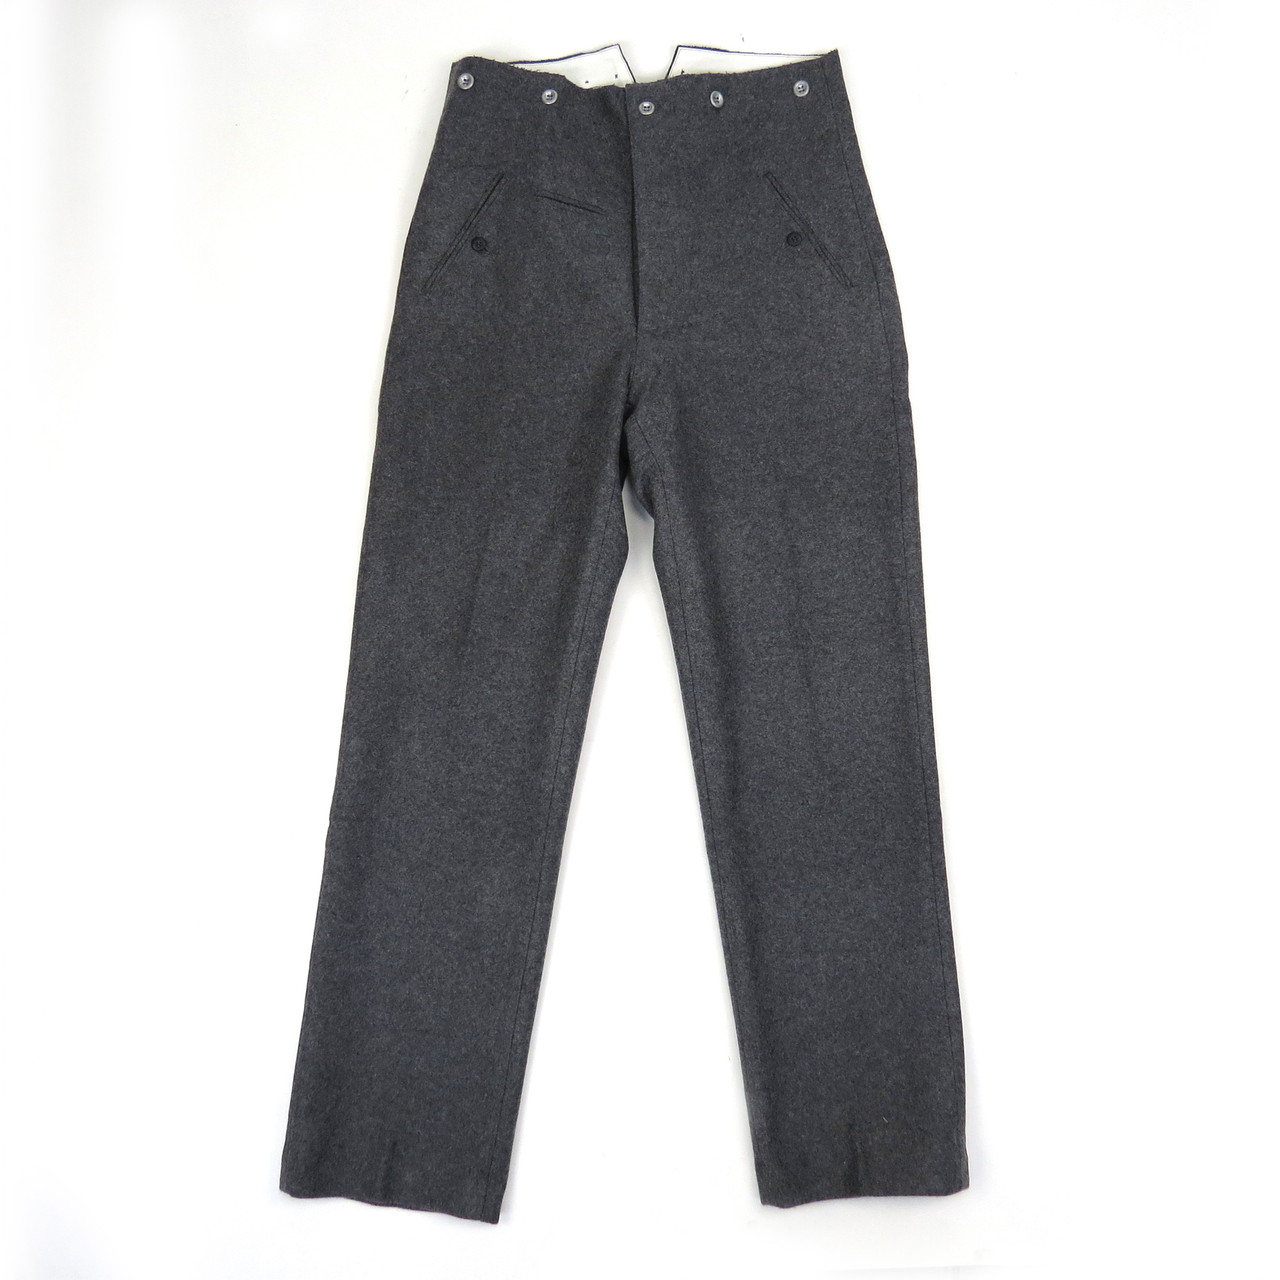 M36 Trousers from Hessen Antique